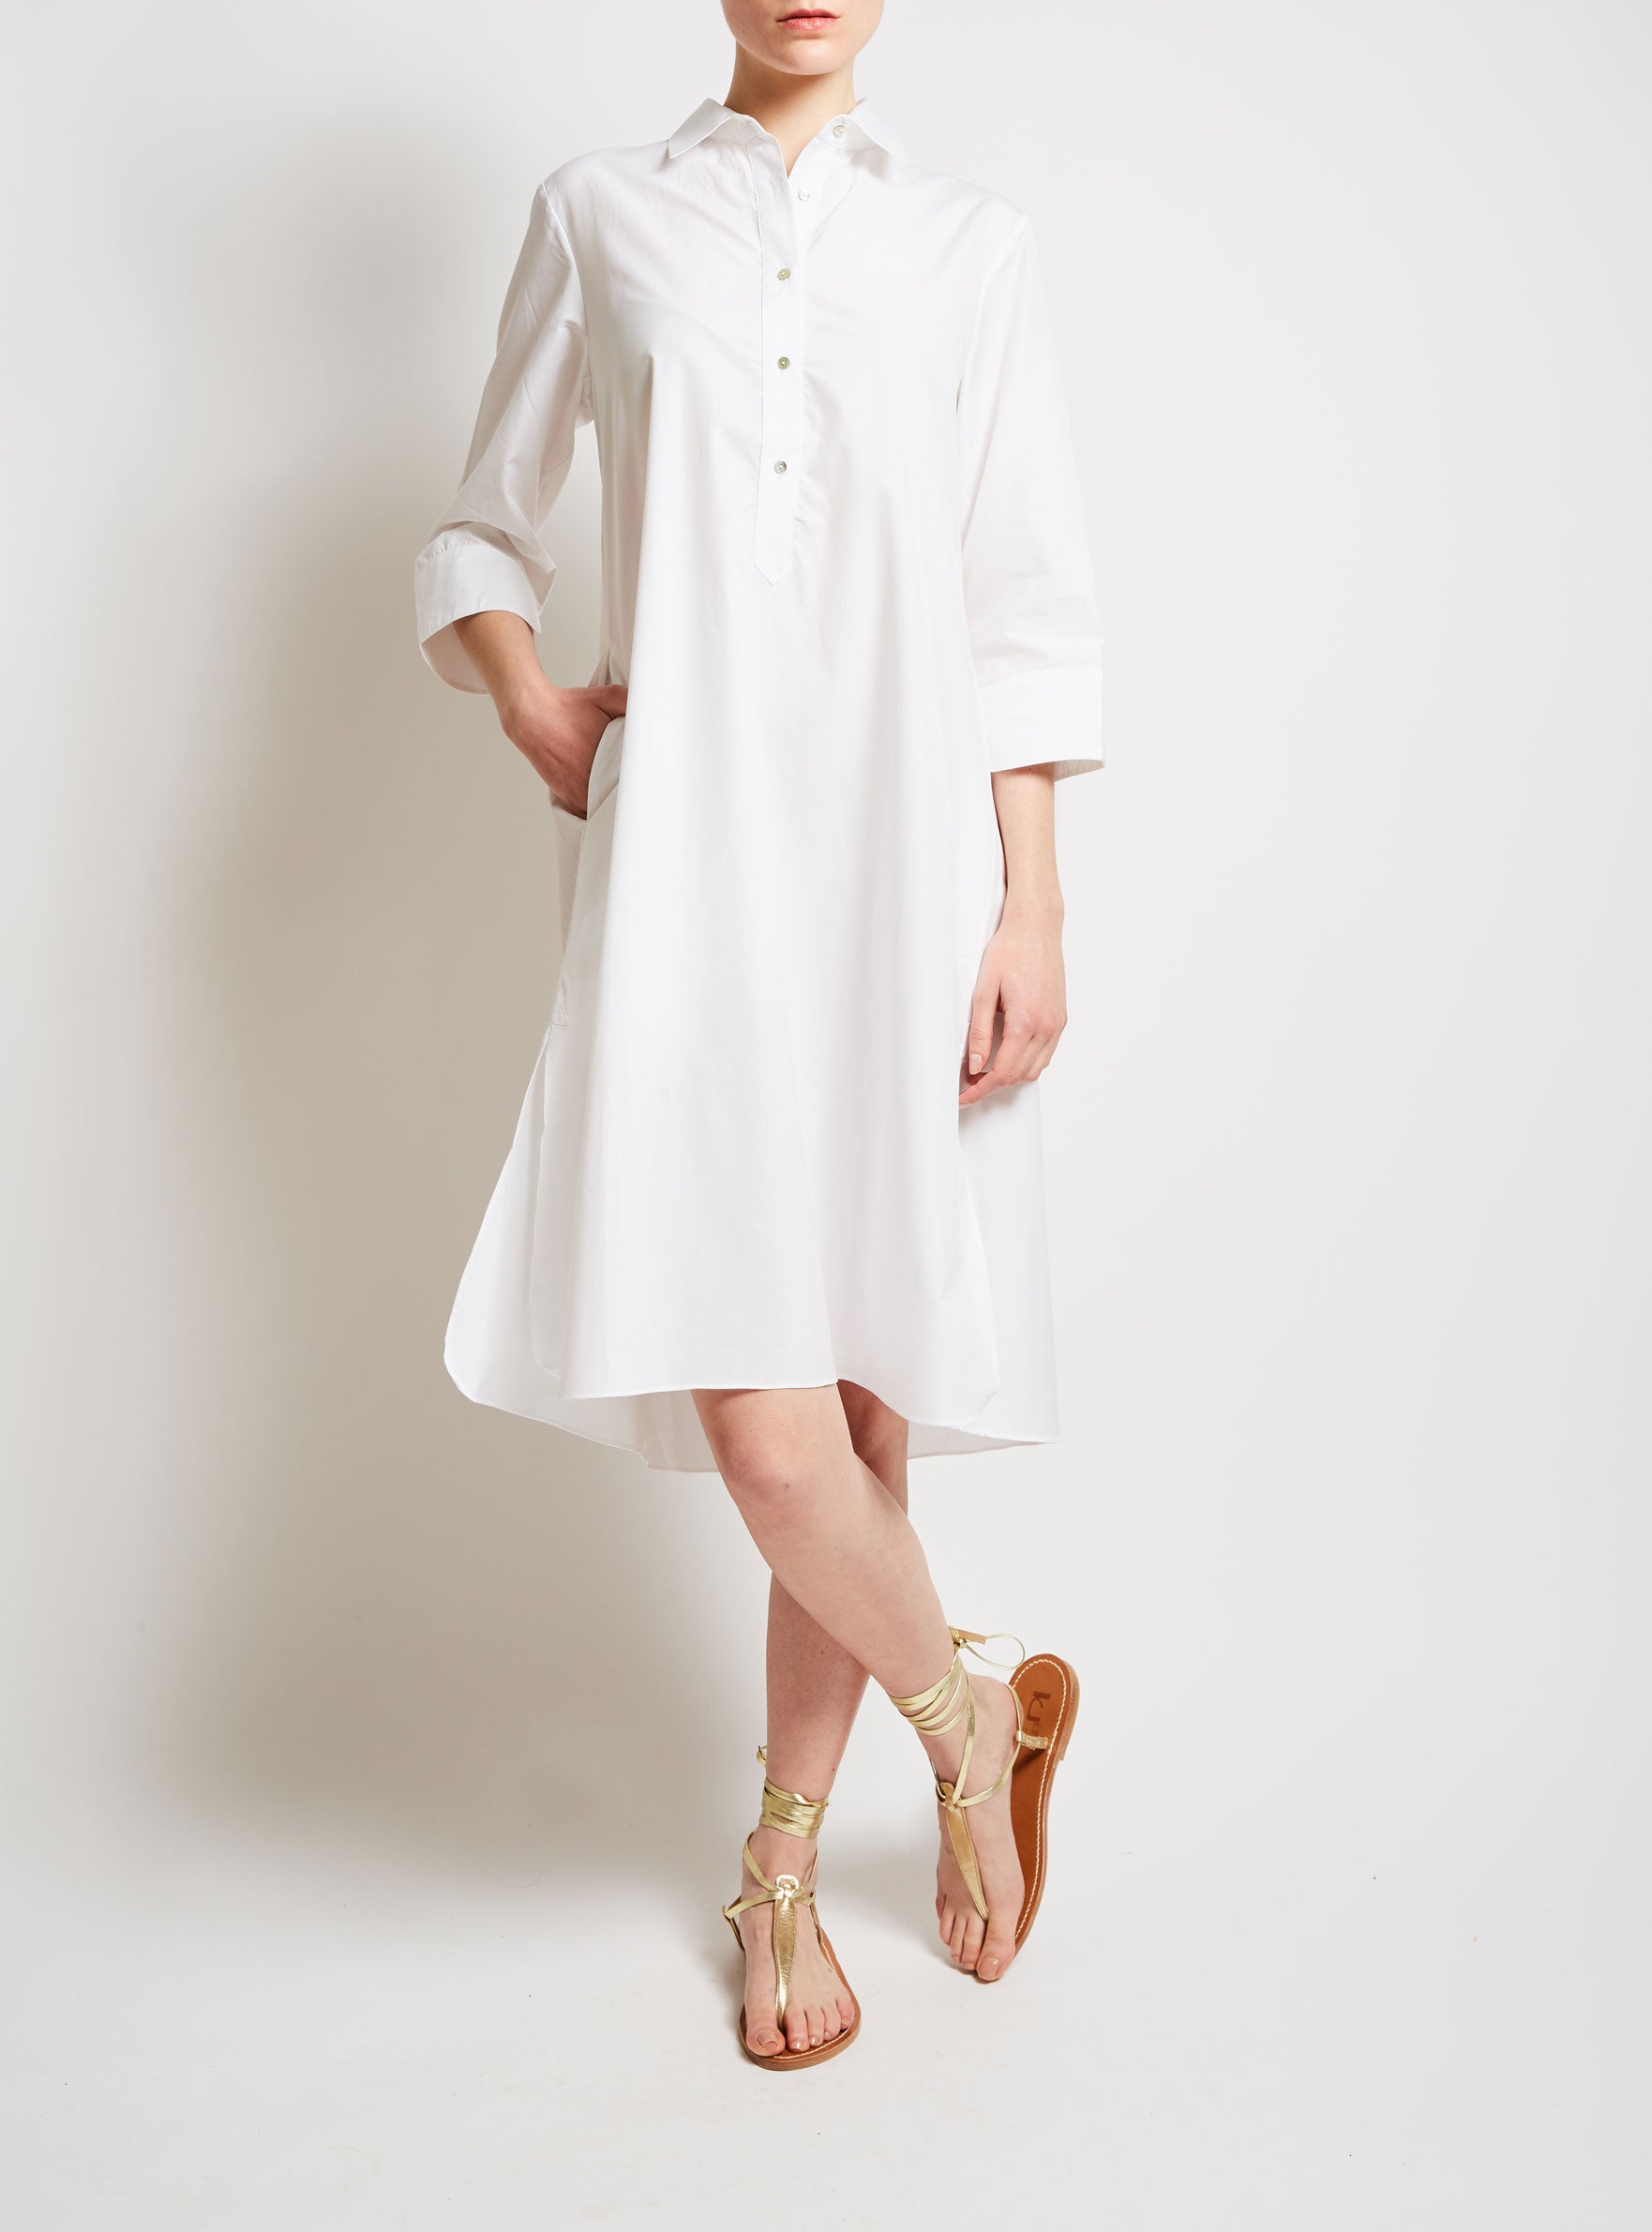 Front view - Iconic Angelica White Shirt knee Dress by Thierry Colson